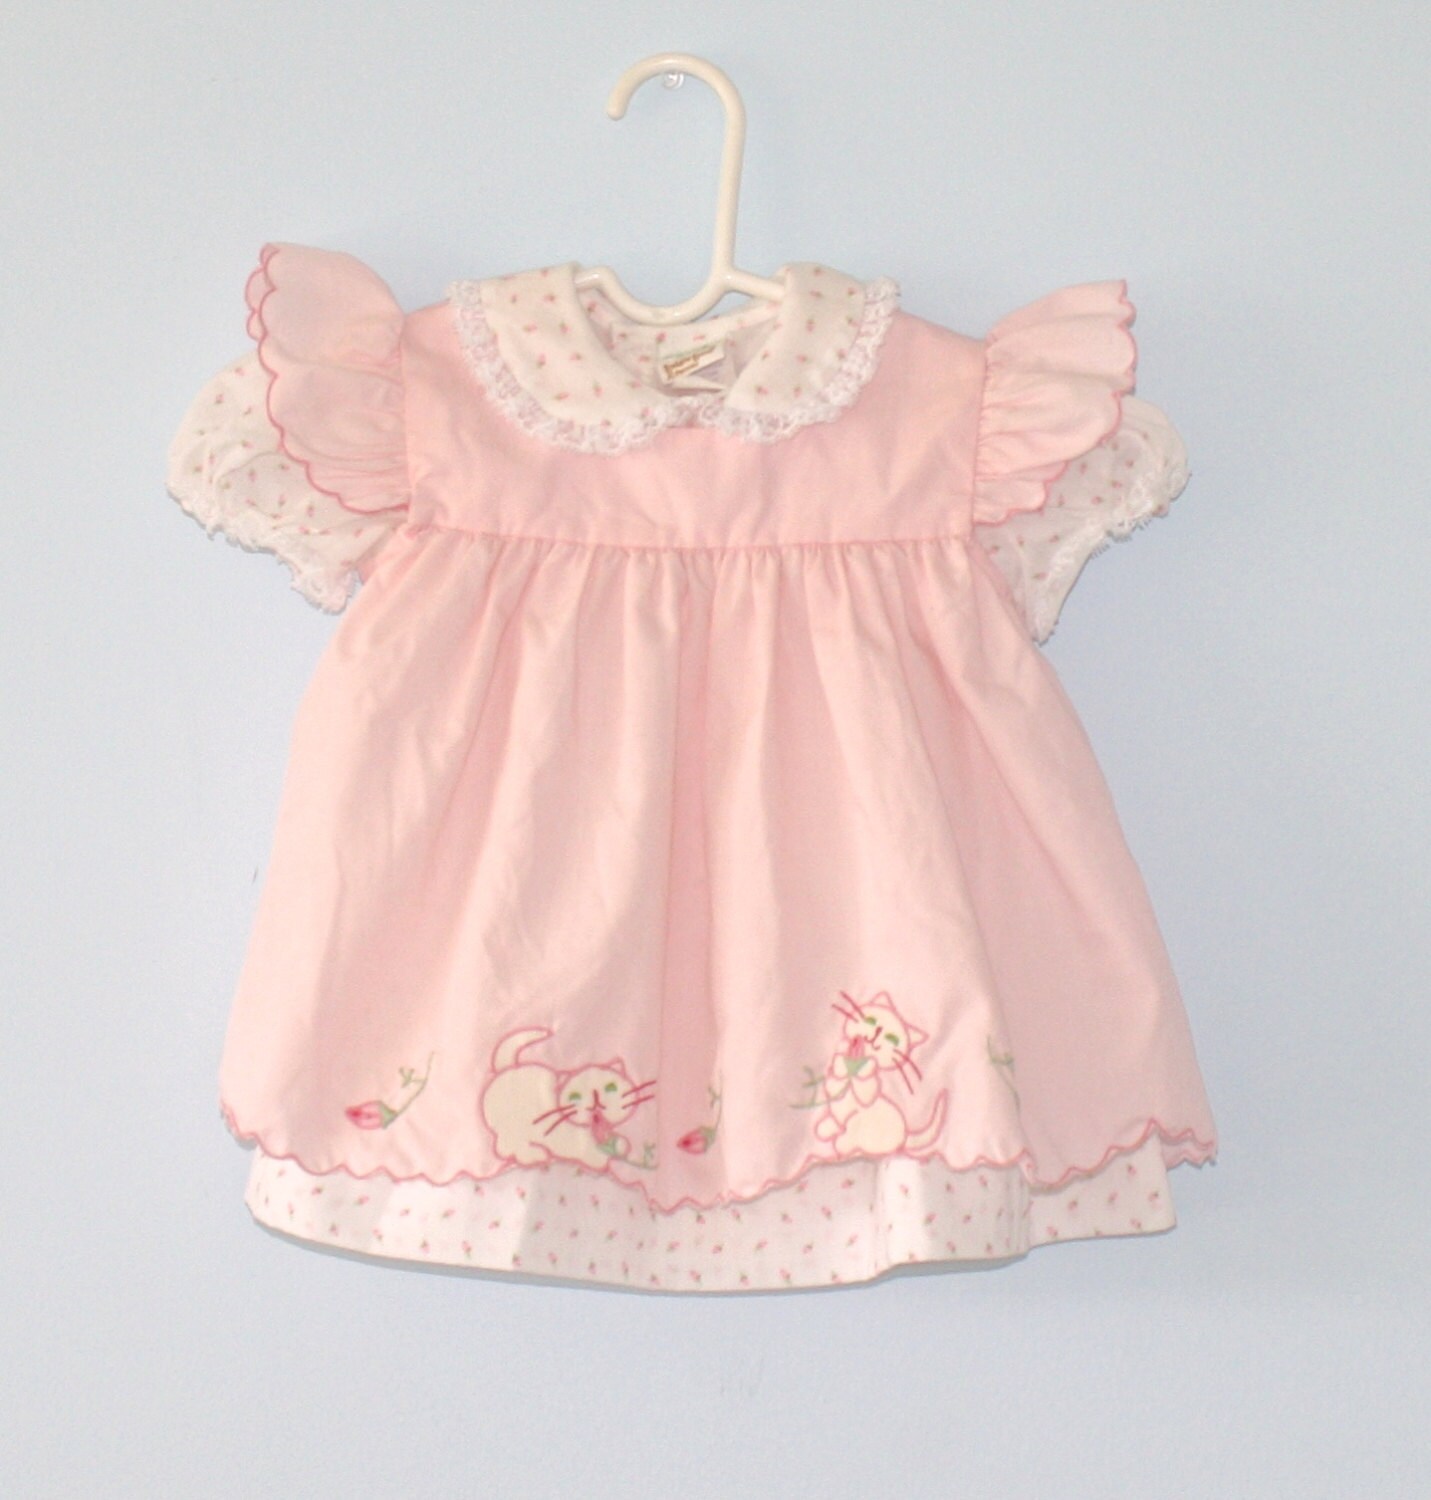 Vintage pink rose bud baby girl's dress . 1970s 80s baby